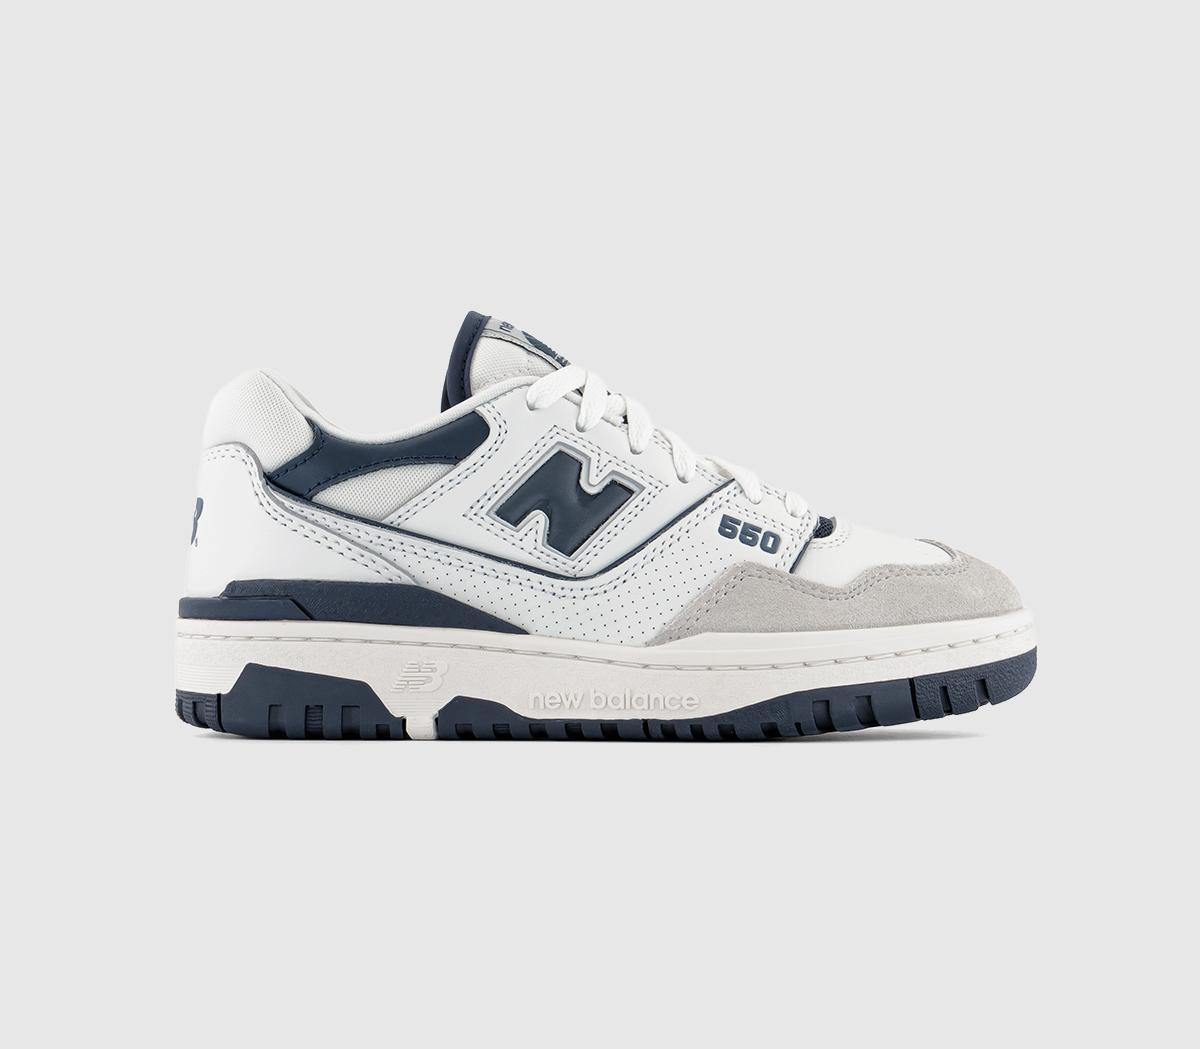 New Balance BB550 Trainers White Blue - Women's Trainers